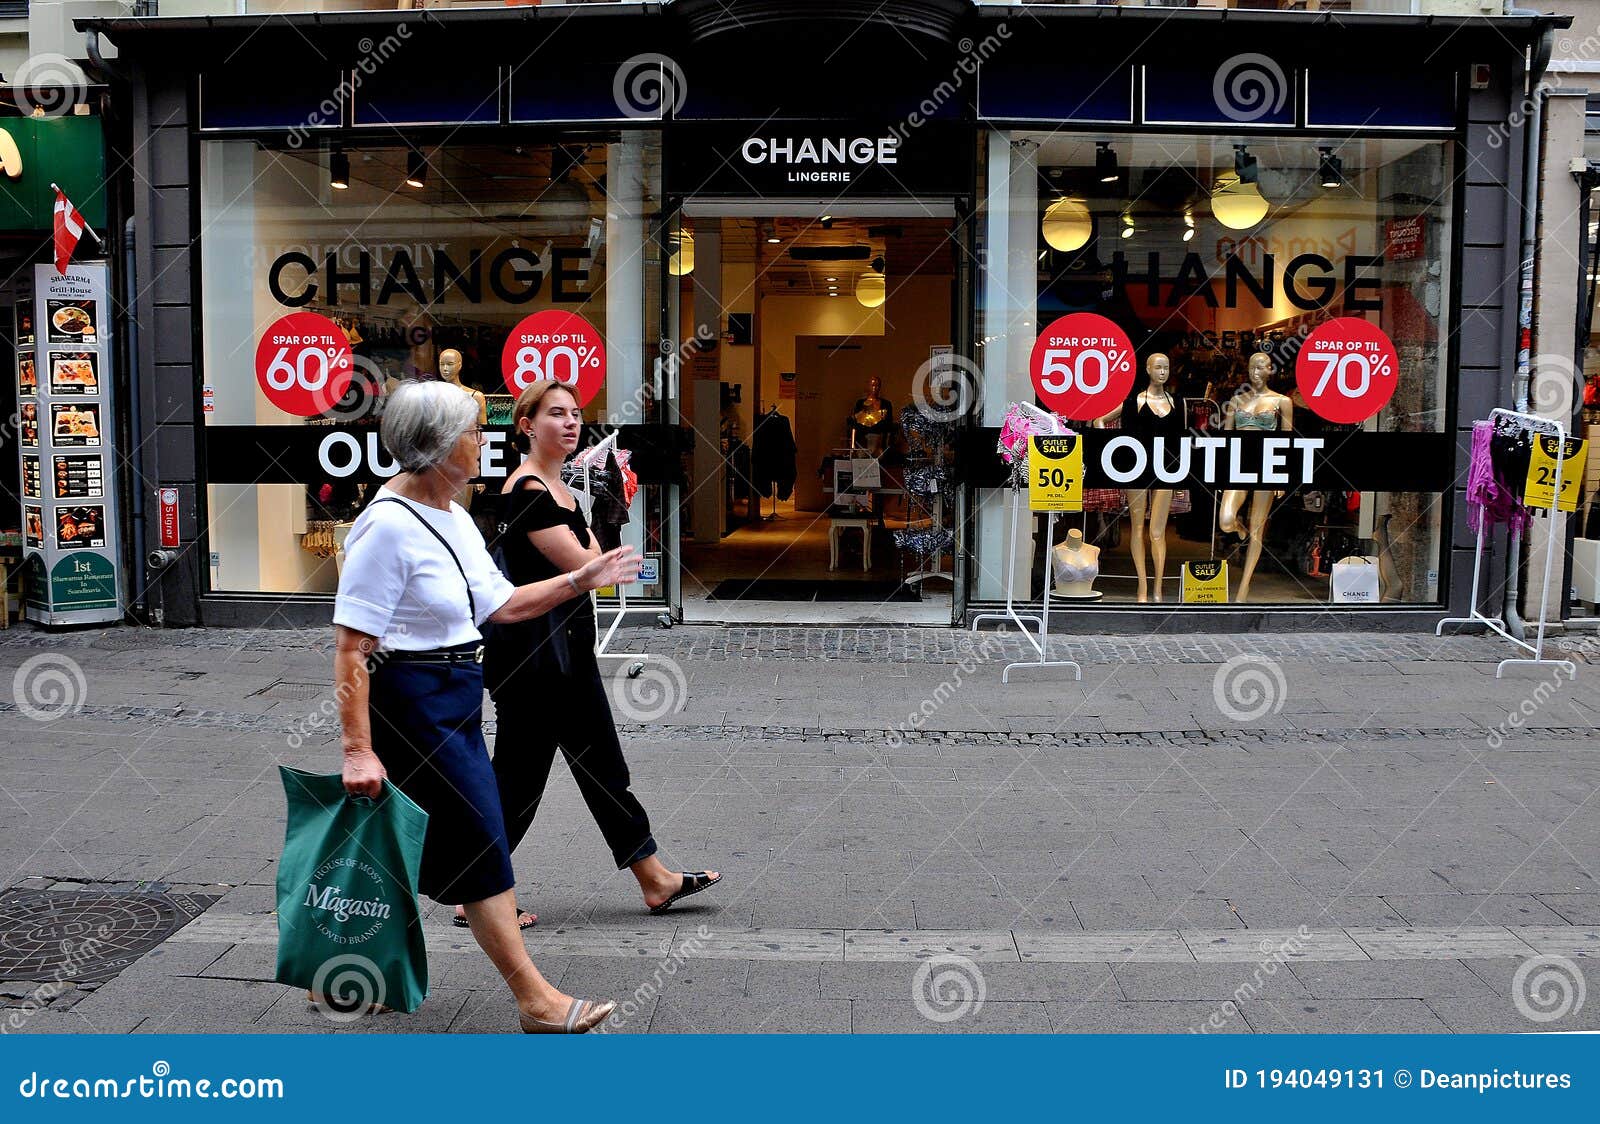 60 80 Off at Outlet in Change Lingerie Store in Capial Photo - Image of copenhagen, financial: 194049131